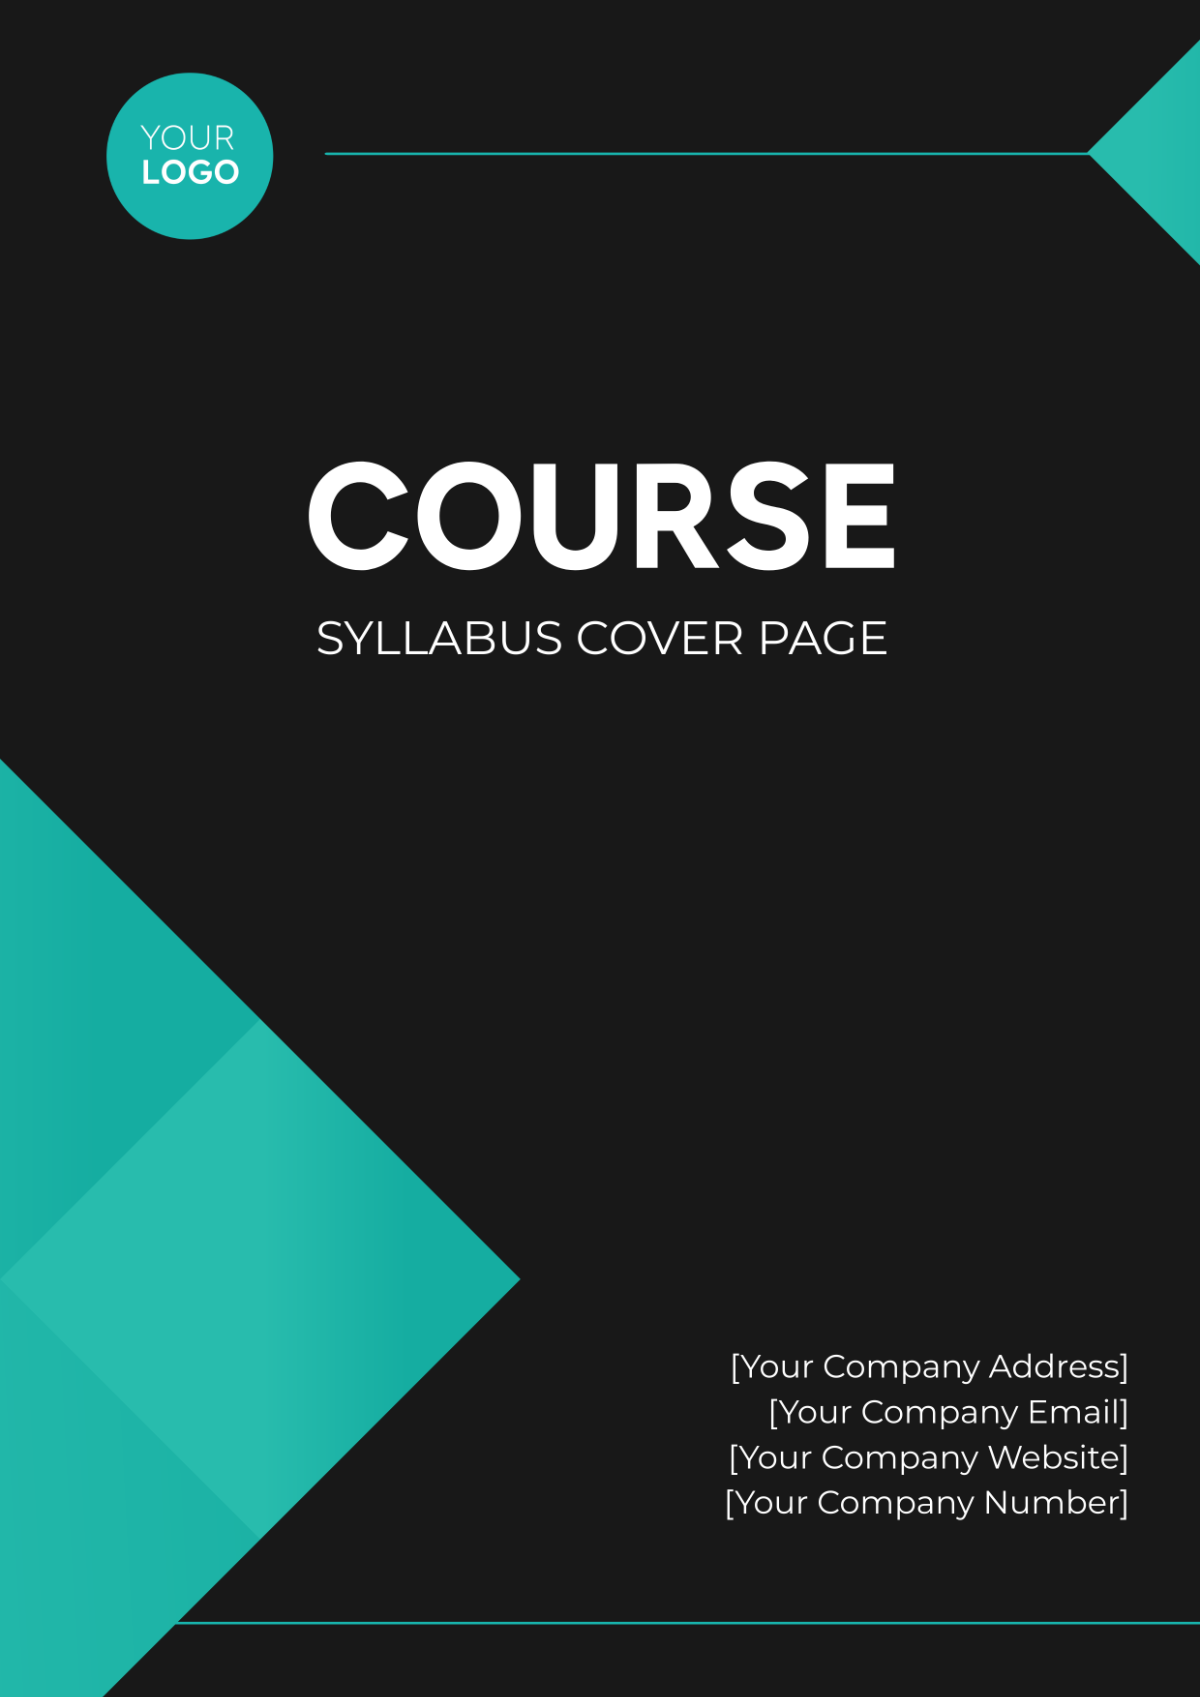 Course Syllabus Cover Page